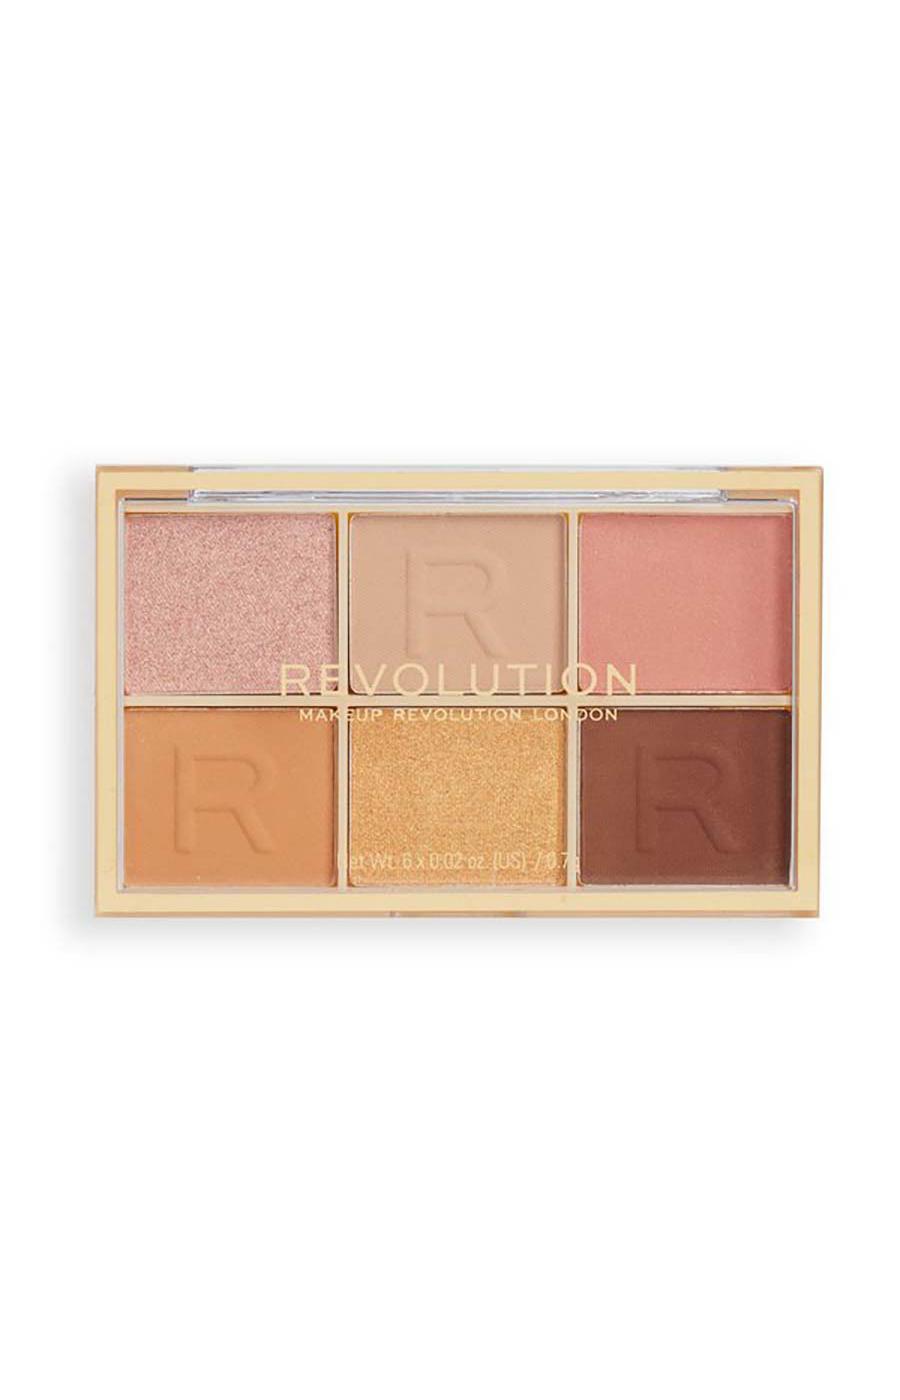 Makeup Revolution Reloaded Palette - Nude About You; image 1 of 3